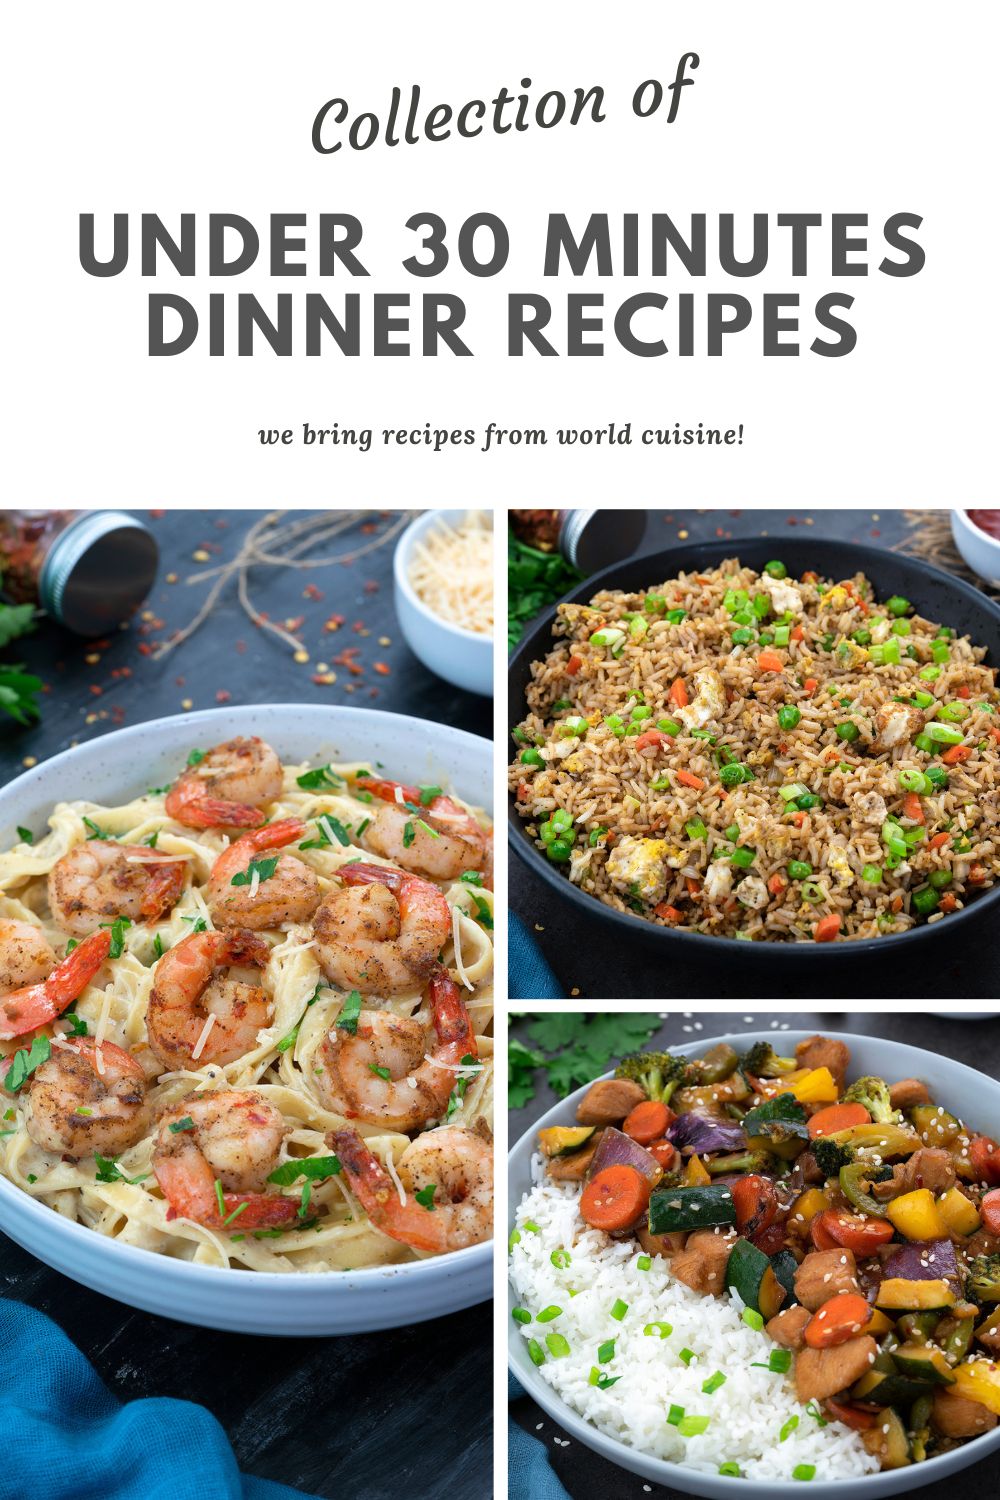 A collection of under 30 minutes dinner recipes depicted in a collage of images.